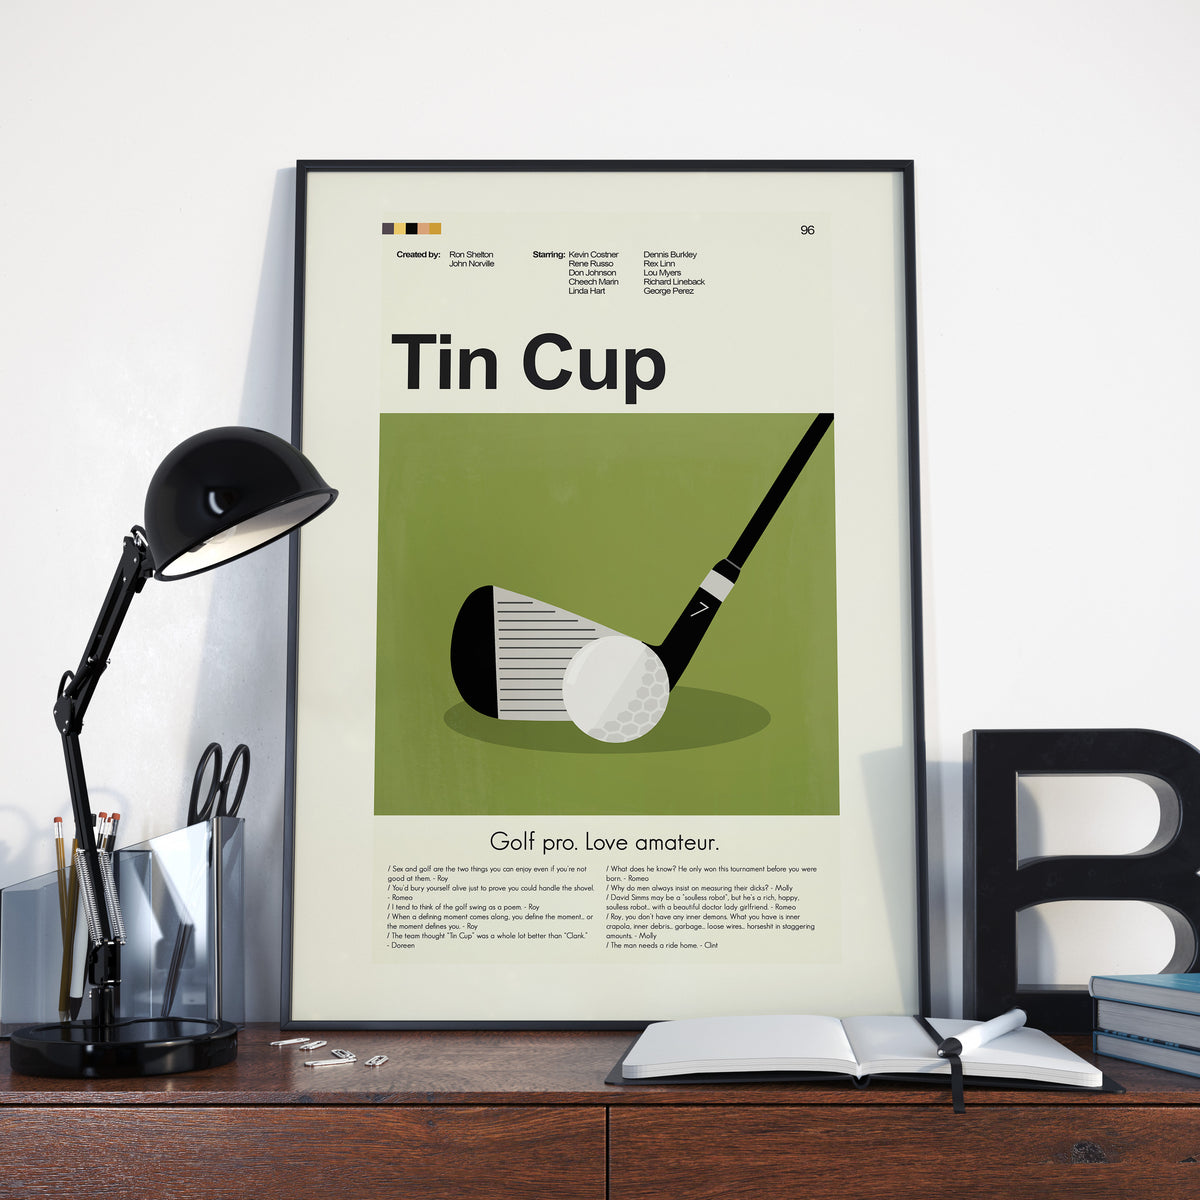 Tin Cup - 7 Iron | 12"x18" or 18"x24" Print only